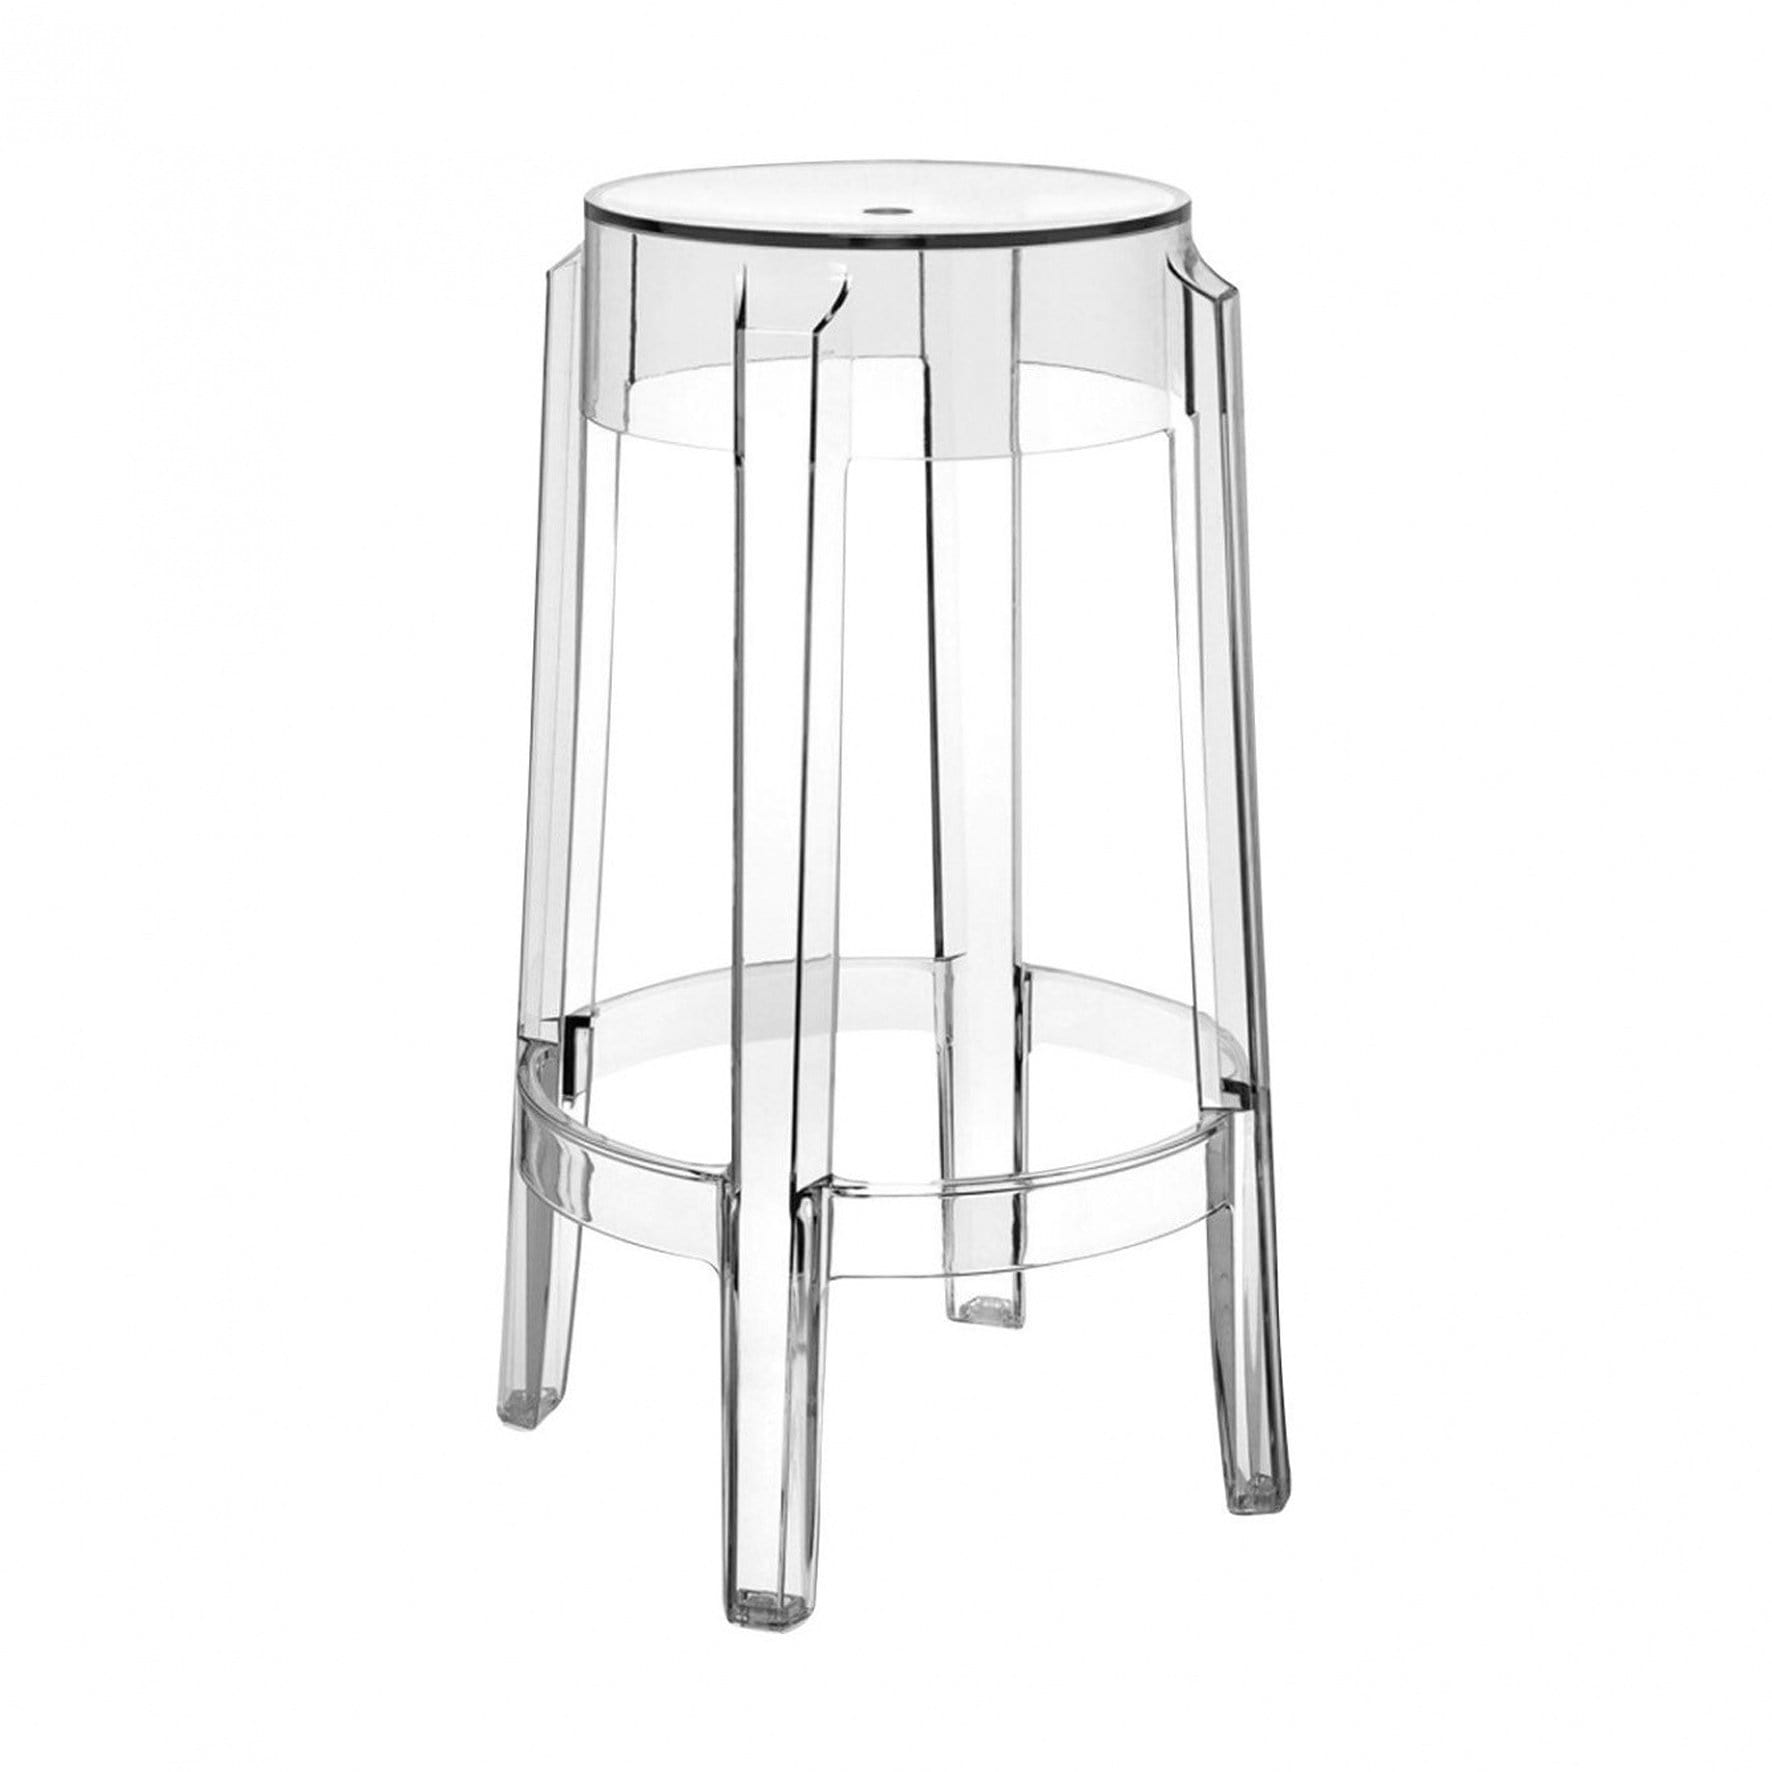 One transparent stool by Kartell.